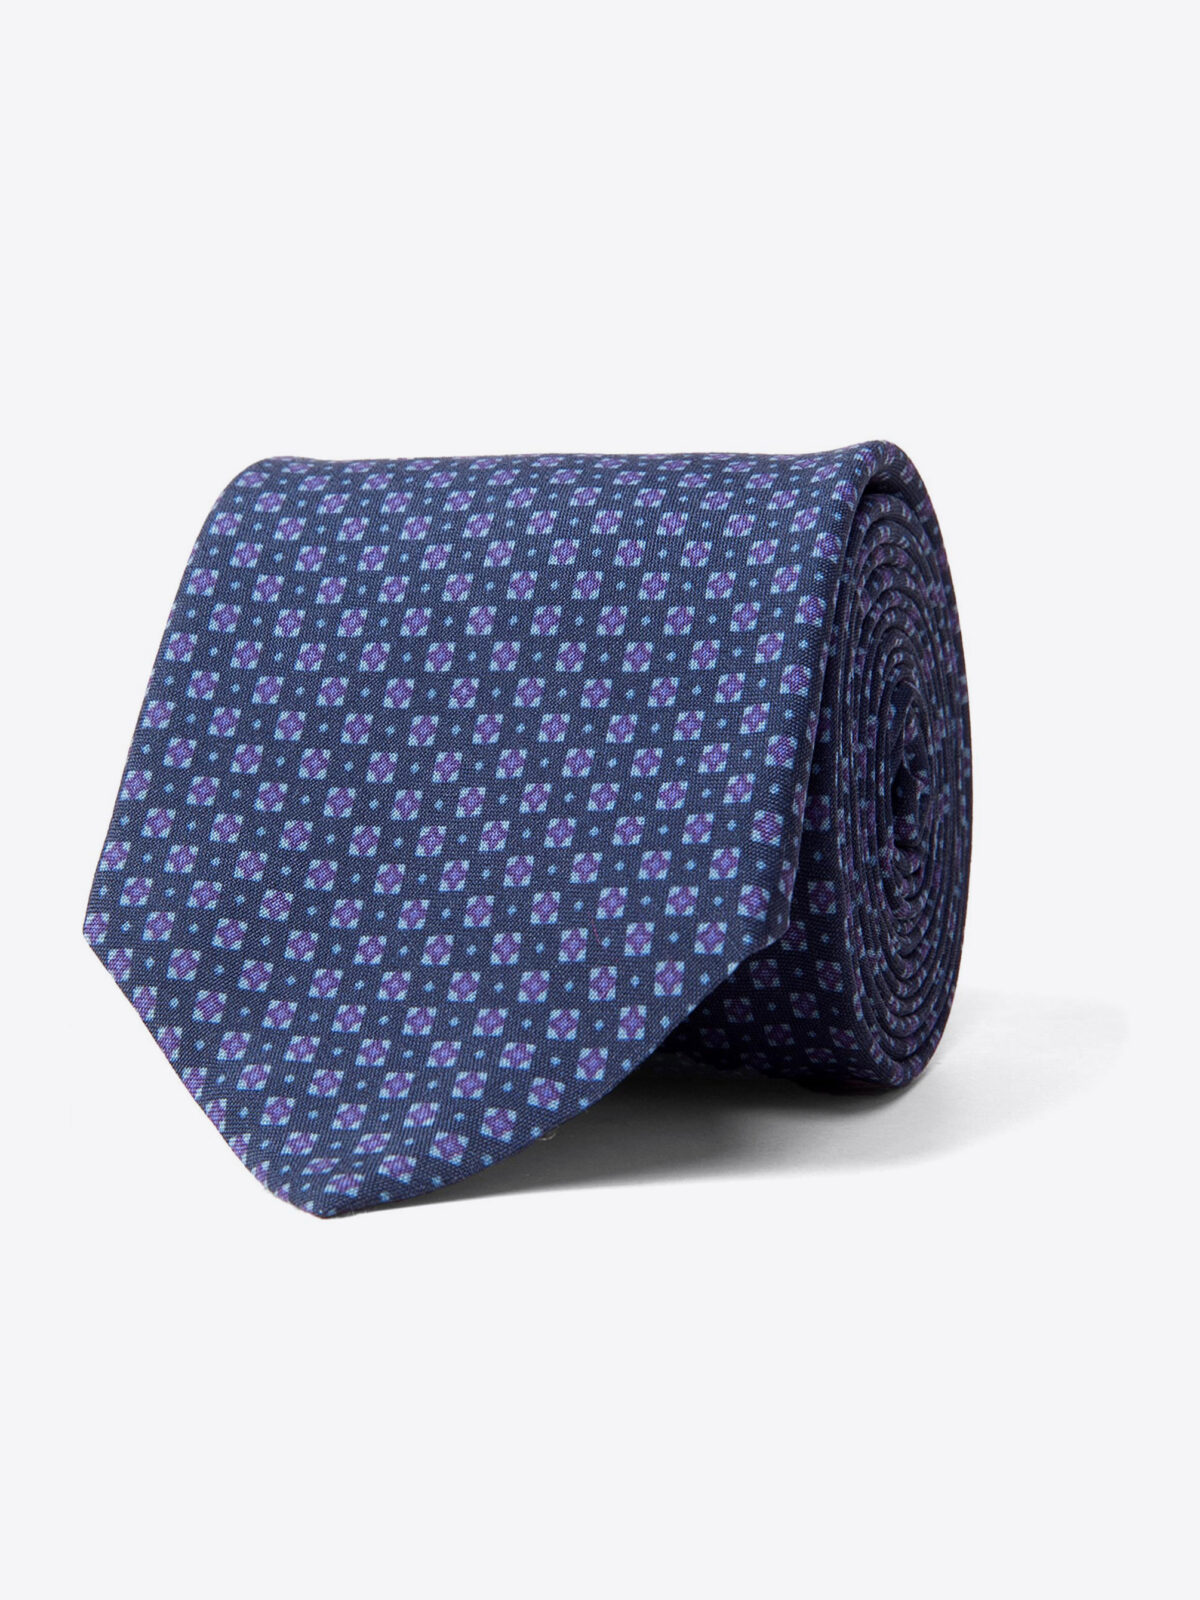 Blue and Lavender Small Foulard Print Tie